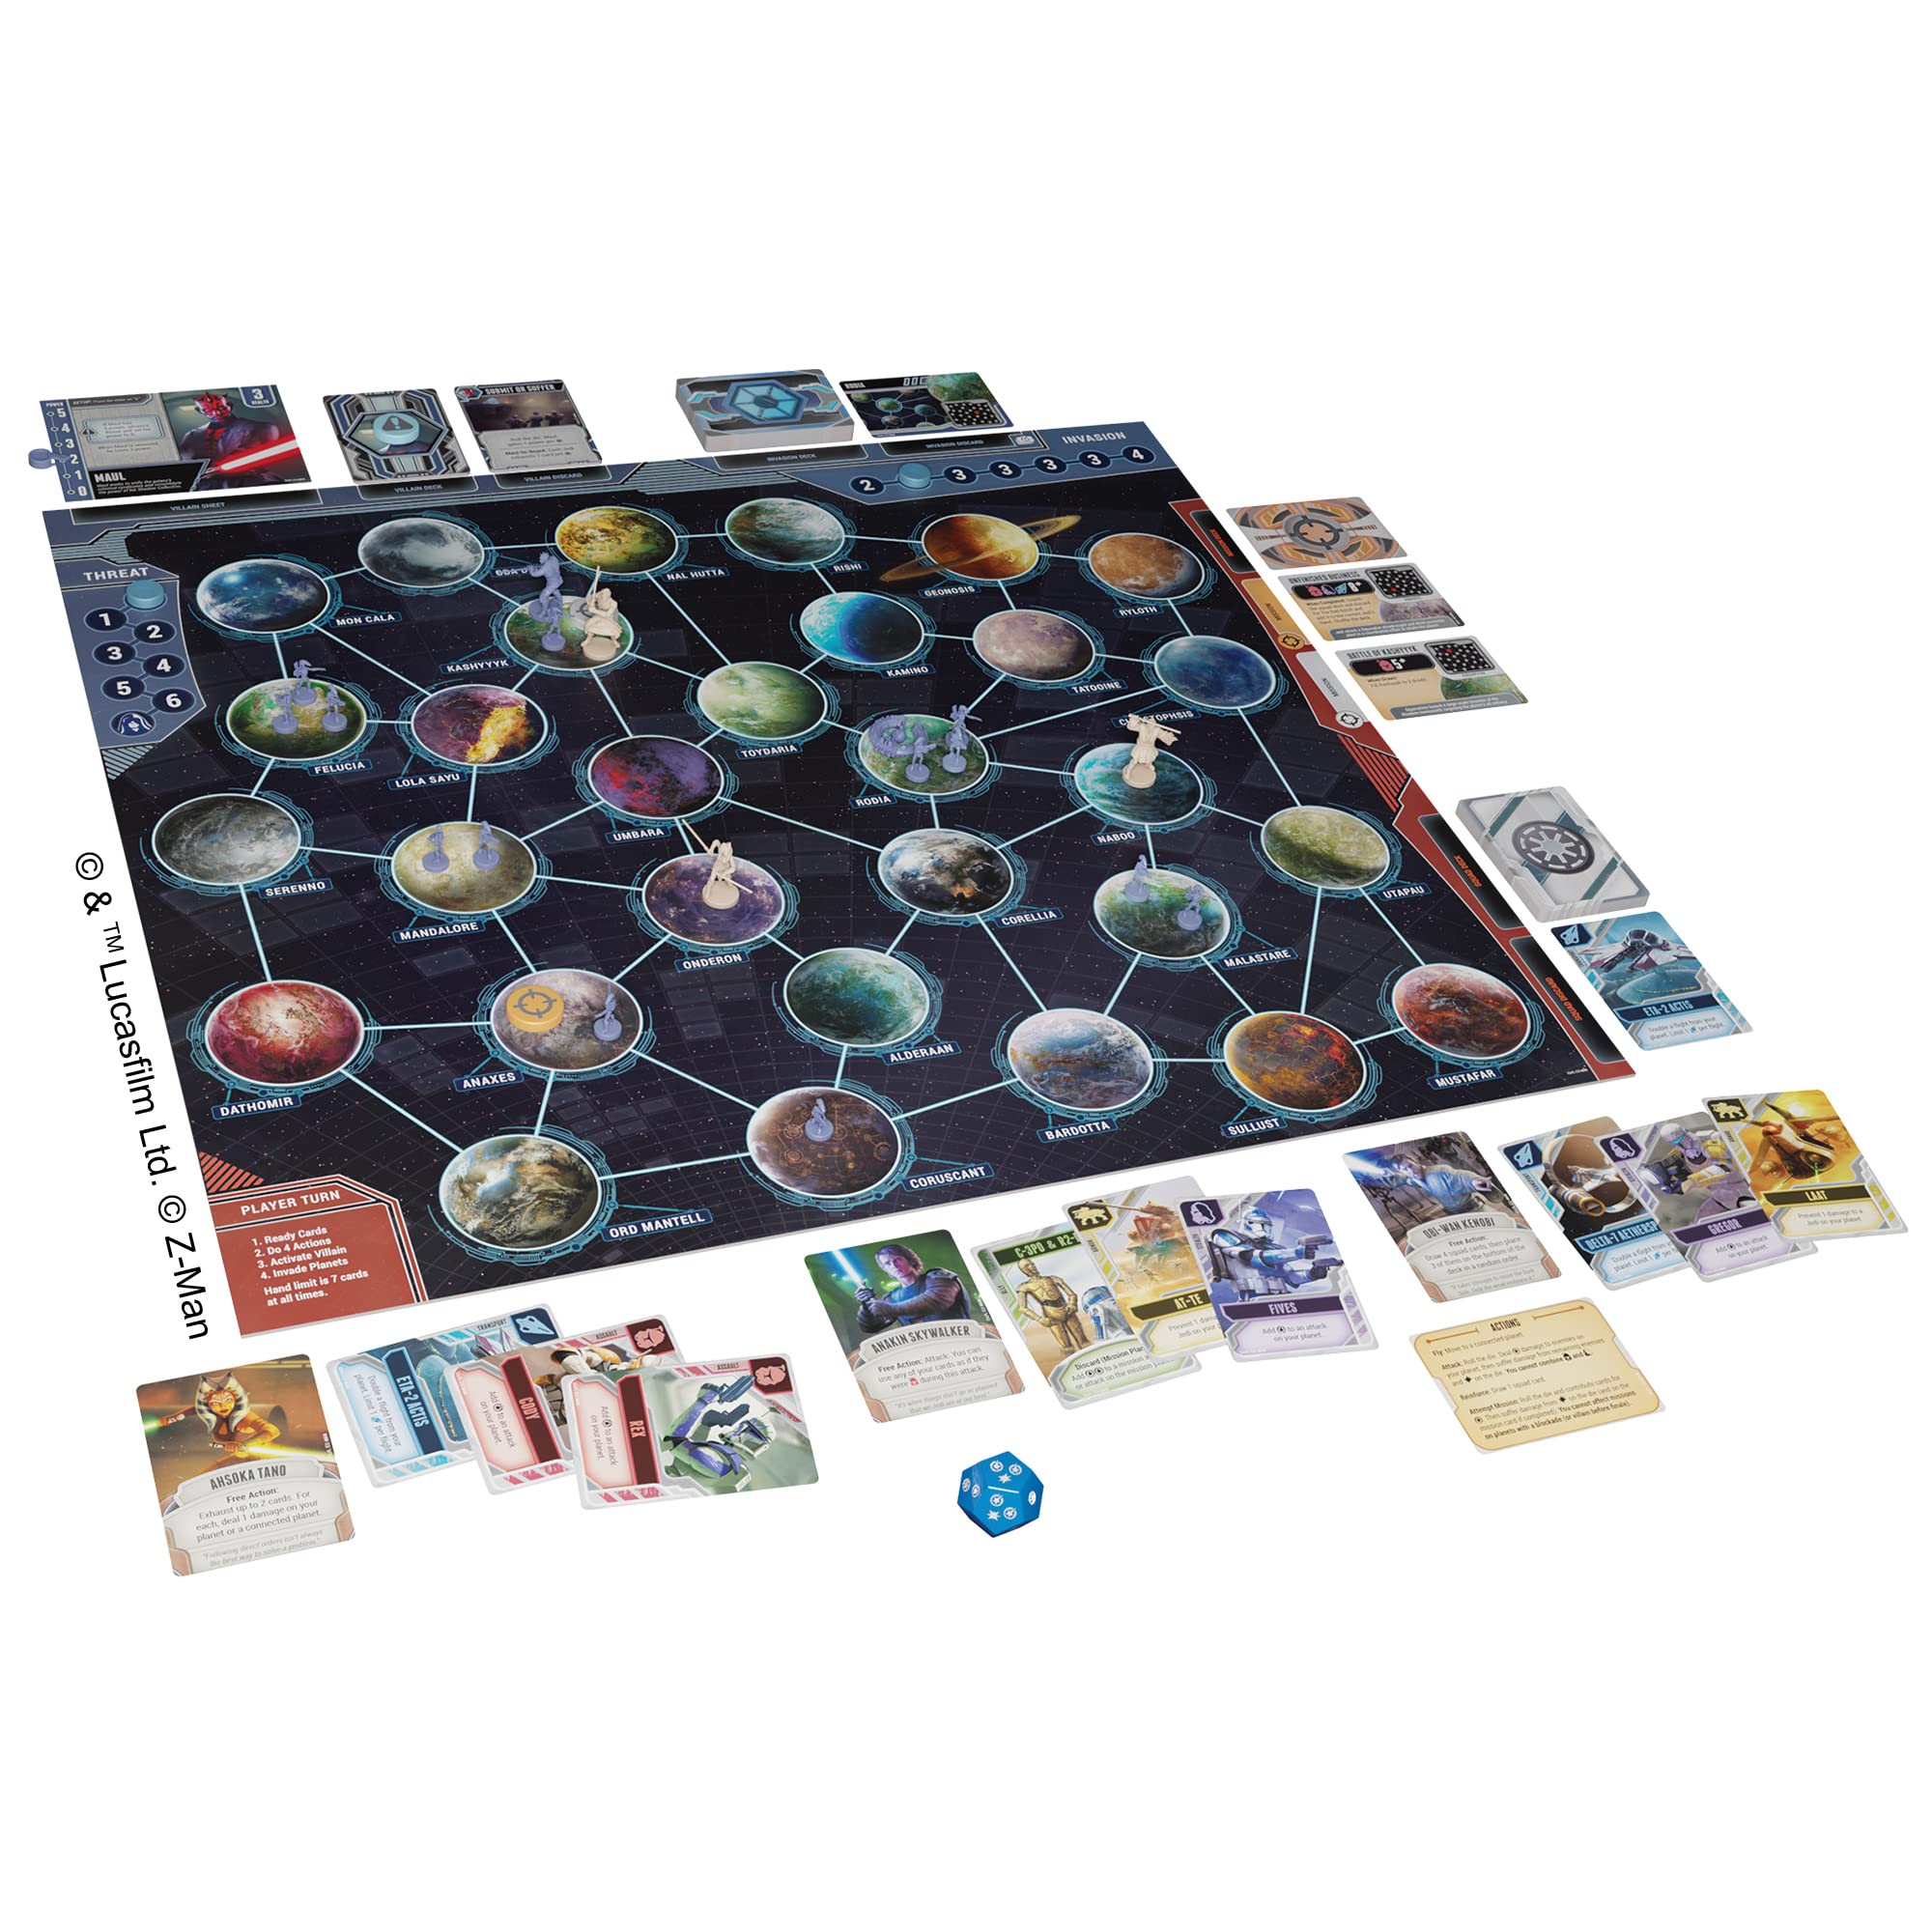 Star Wars The Clone Wars Board Game | A Pandemic System | Tactical Strategy Game for Adults and Teens | Ages 14+ | 1-5 Players | Average Playtime 60 Minutes | Made by Z-Man Games